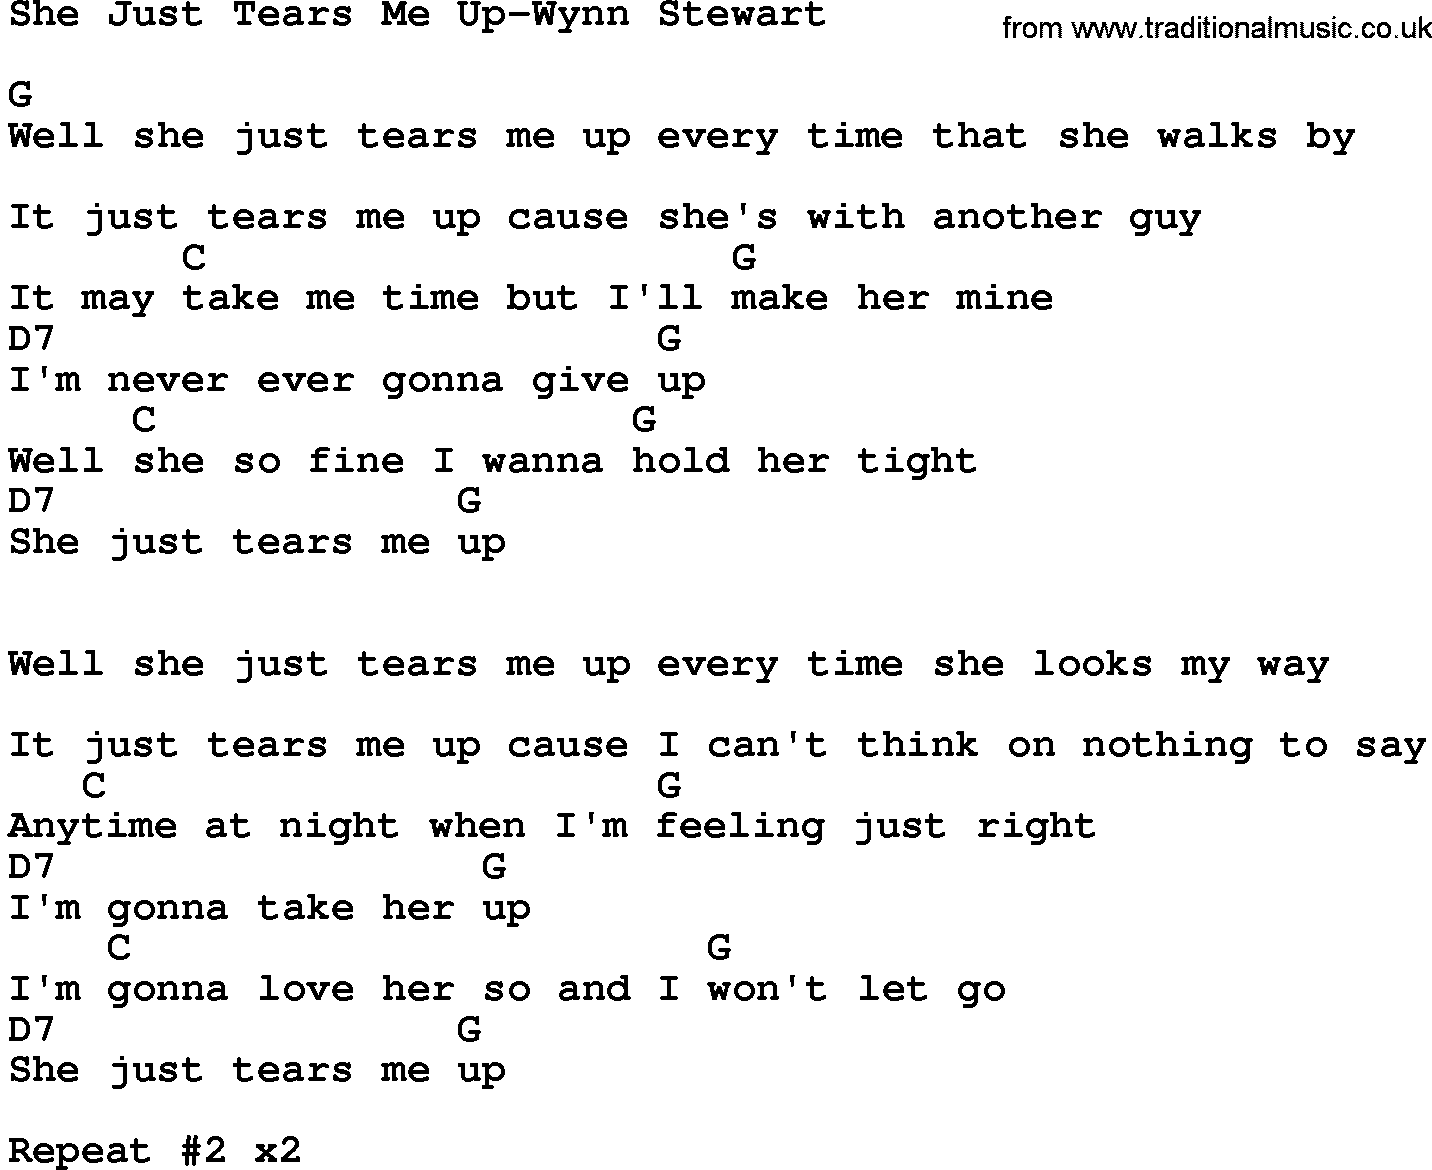 Country music song: She Just Tears Me Up-Wynn Stewart lyrics and chords